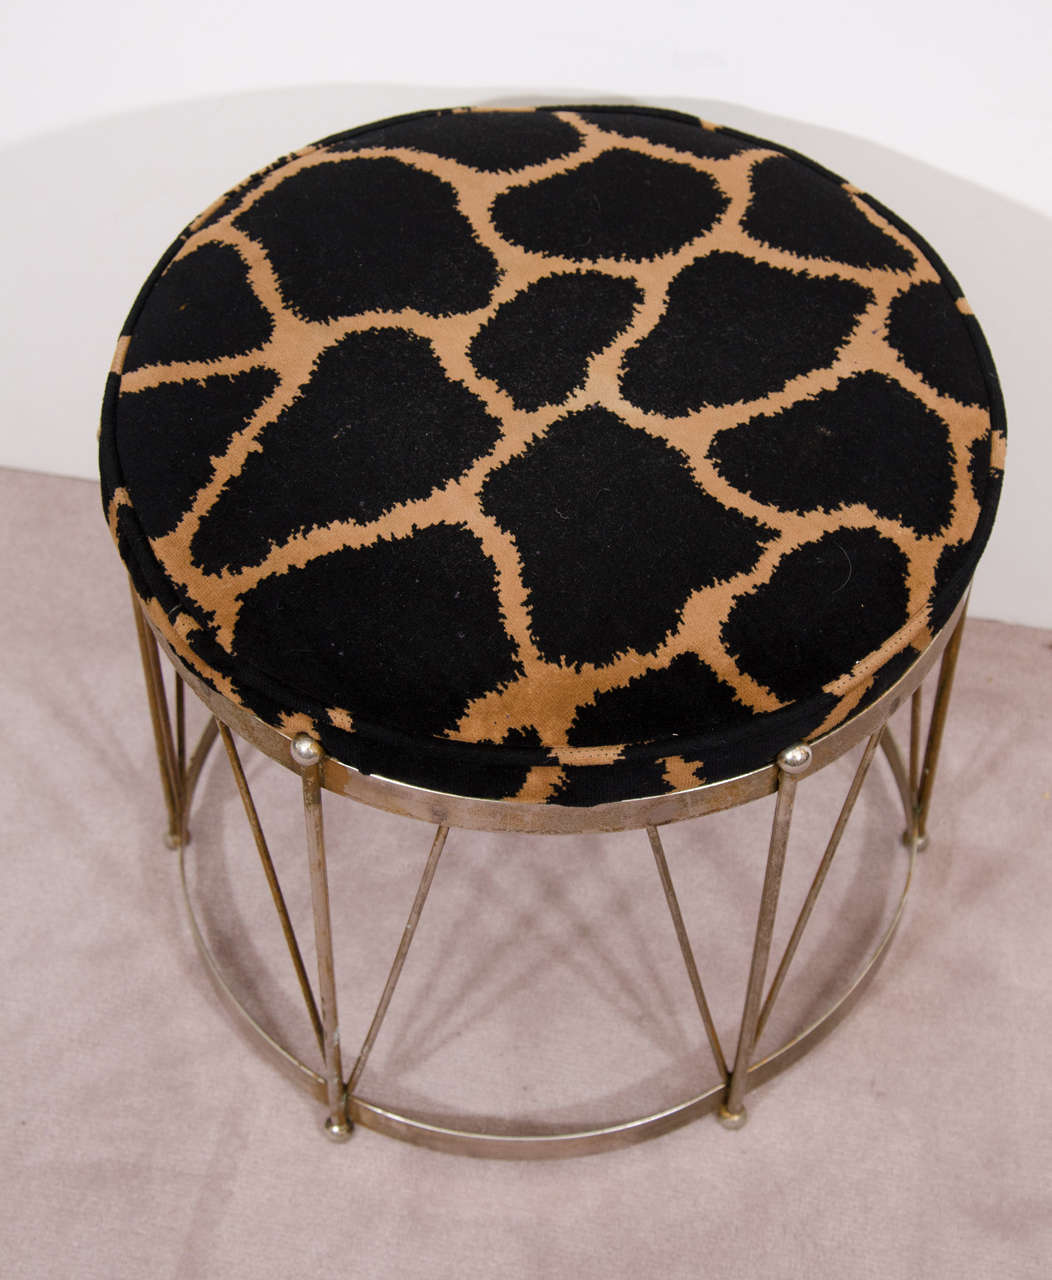 Plated Midcentury Drum Style Stool with Animal Print Upholstery